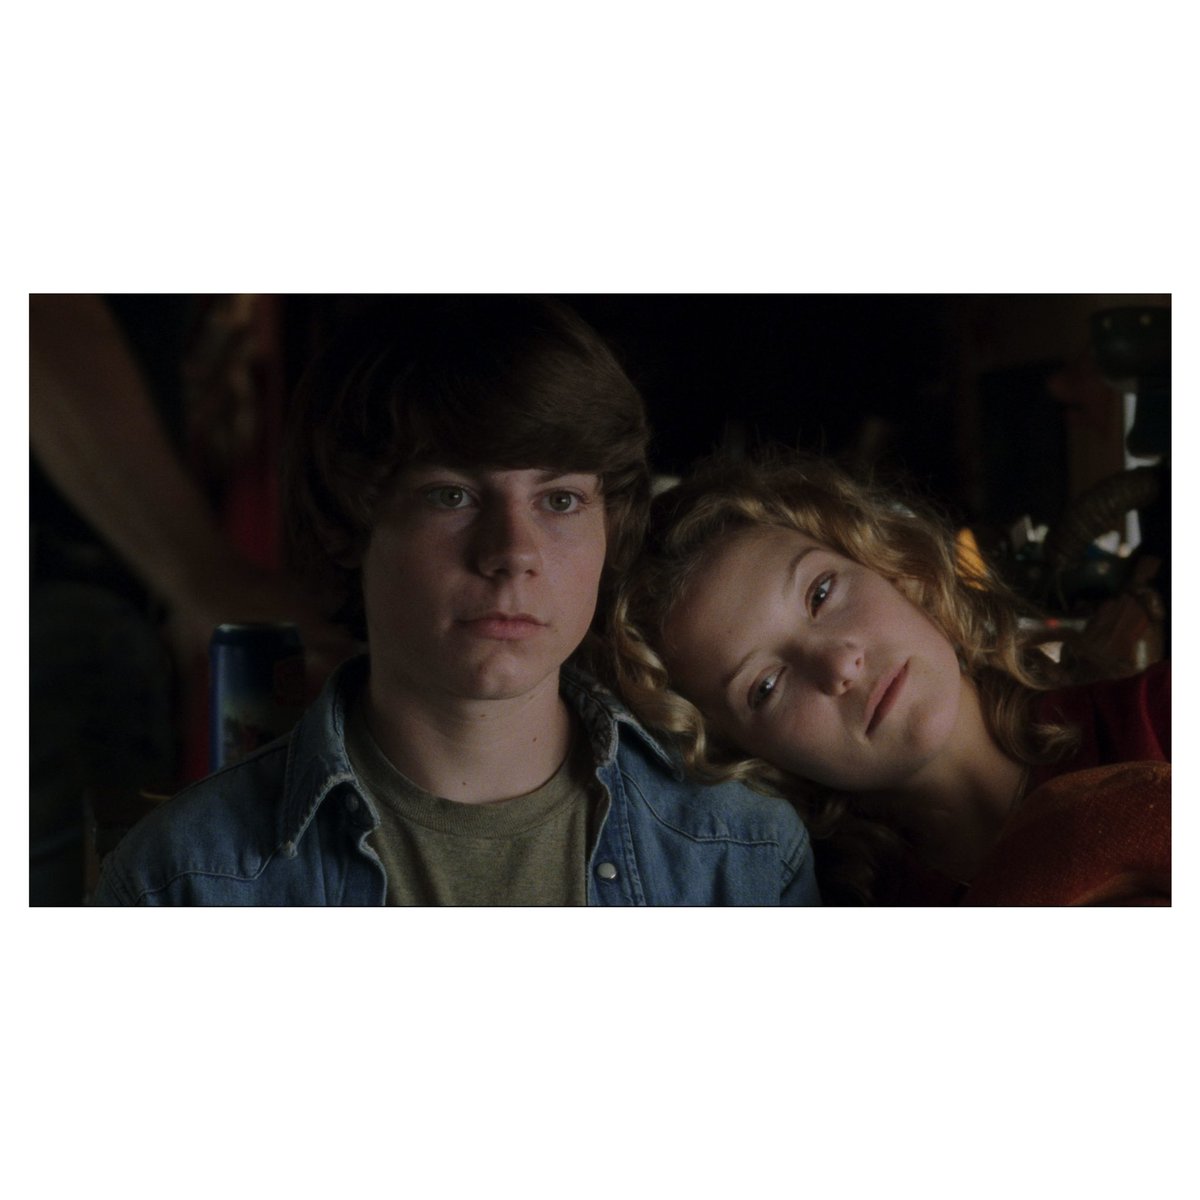 “The only true currency in this bankrupt world is what you share with someone else when you’re uncool.”
#almostfamous #cameroncrowe #patrickfugit #katehudson #billycrudup #zooeydeschanel #francesmcdormand #philipseymourhoffman @CameronCrowe